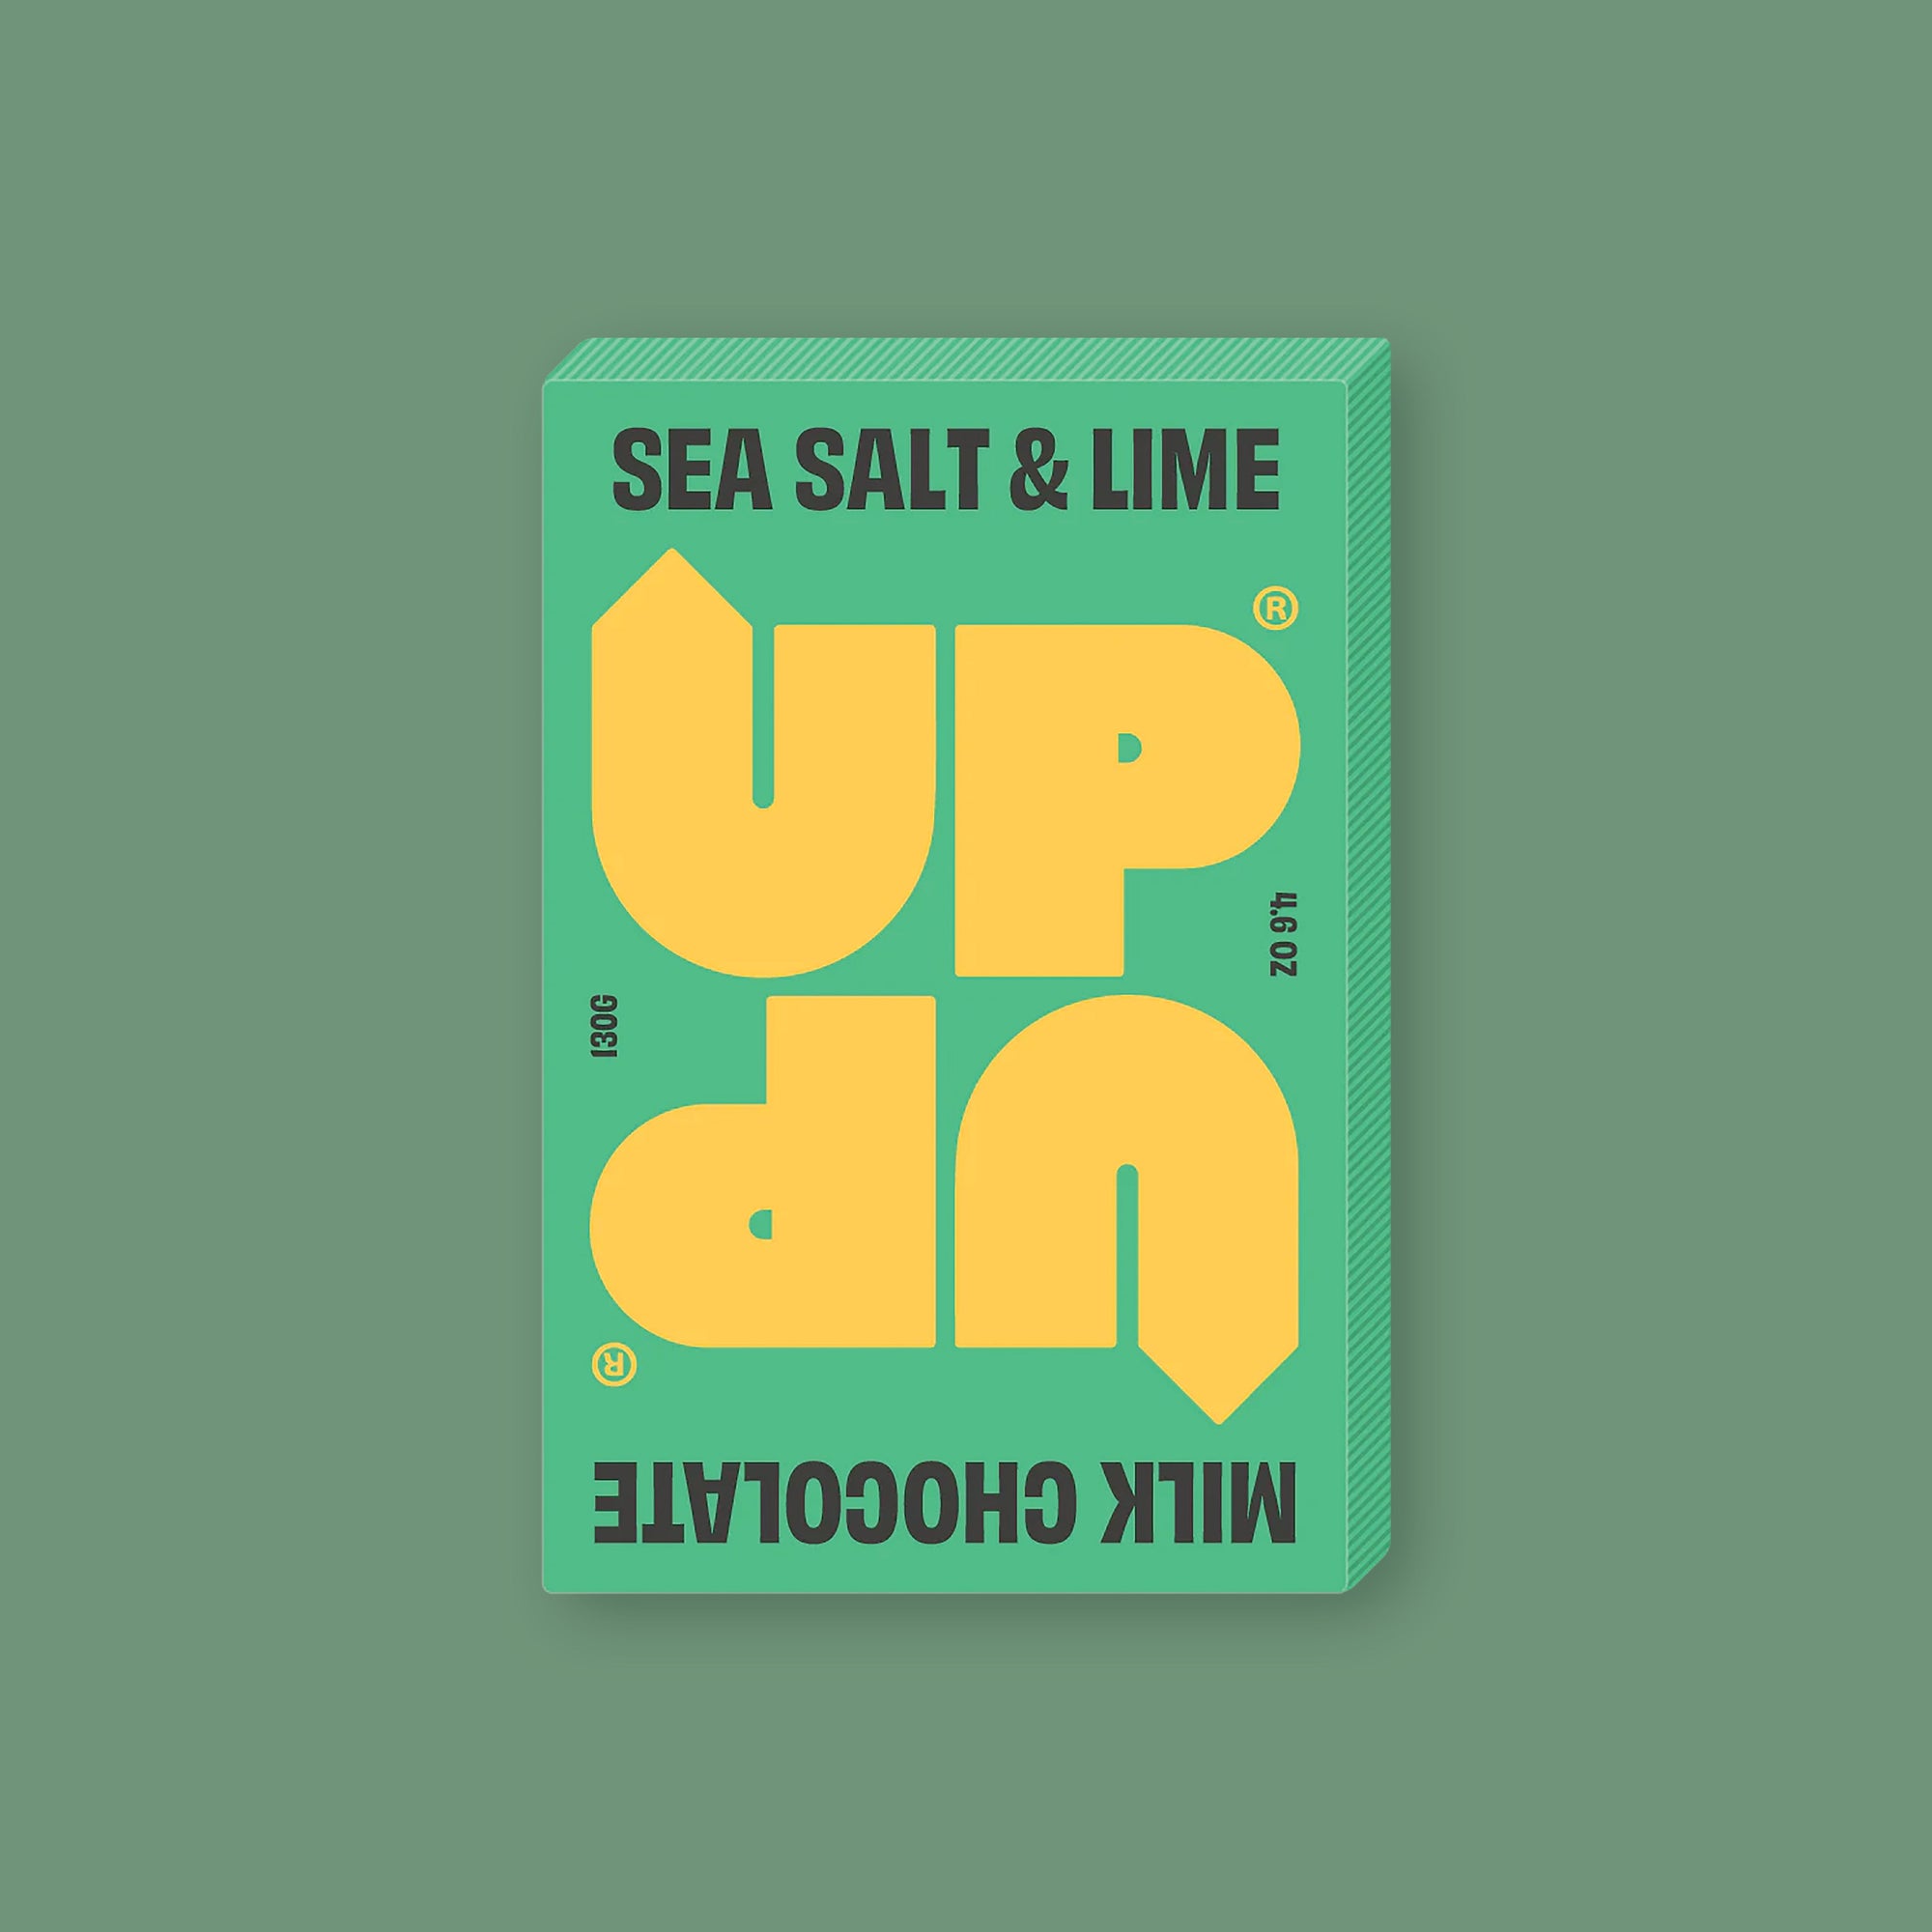 On a seafoam background sits a box of UP UP Sea Salt & Lime Chocolate. The packaging is in lime green and yellow. 